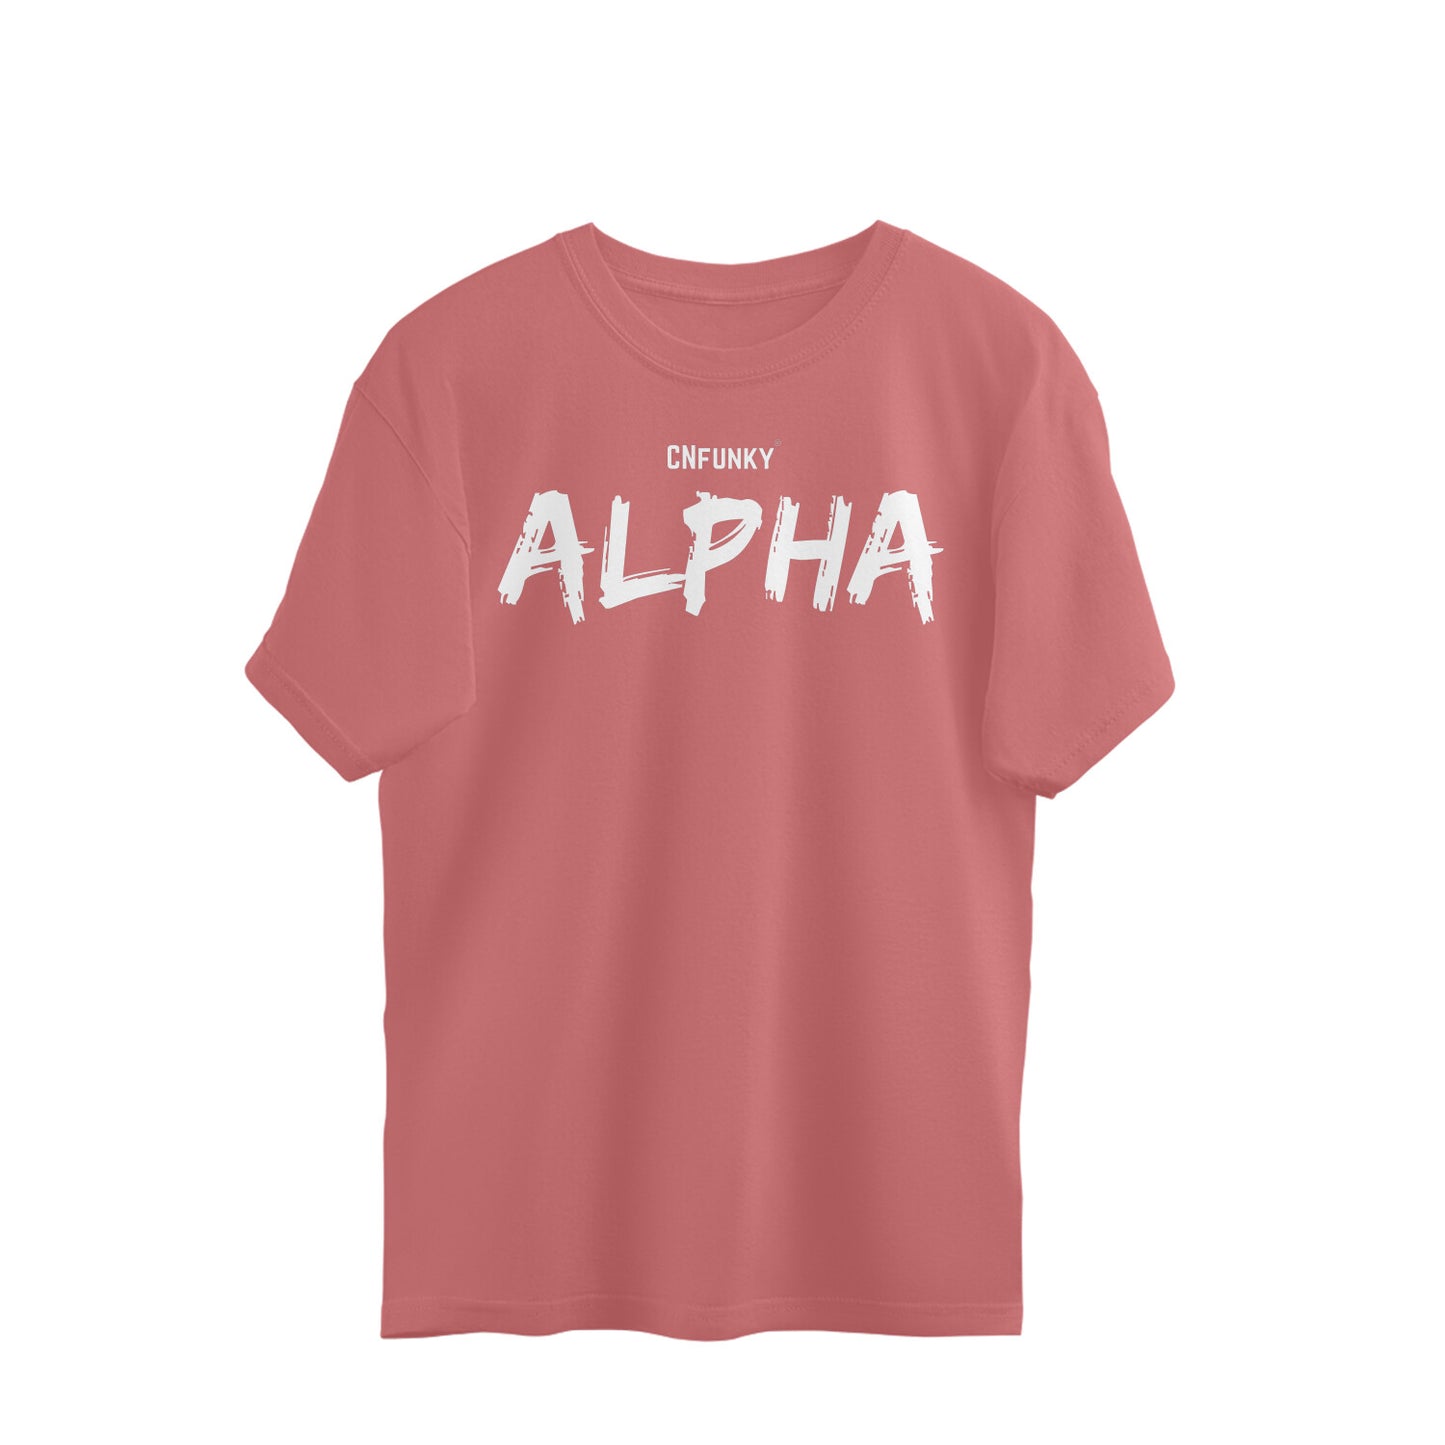 ALPHA Over Sized T-shirt